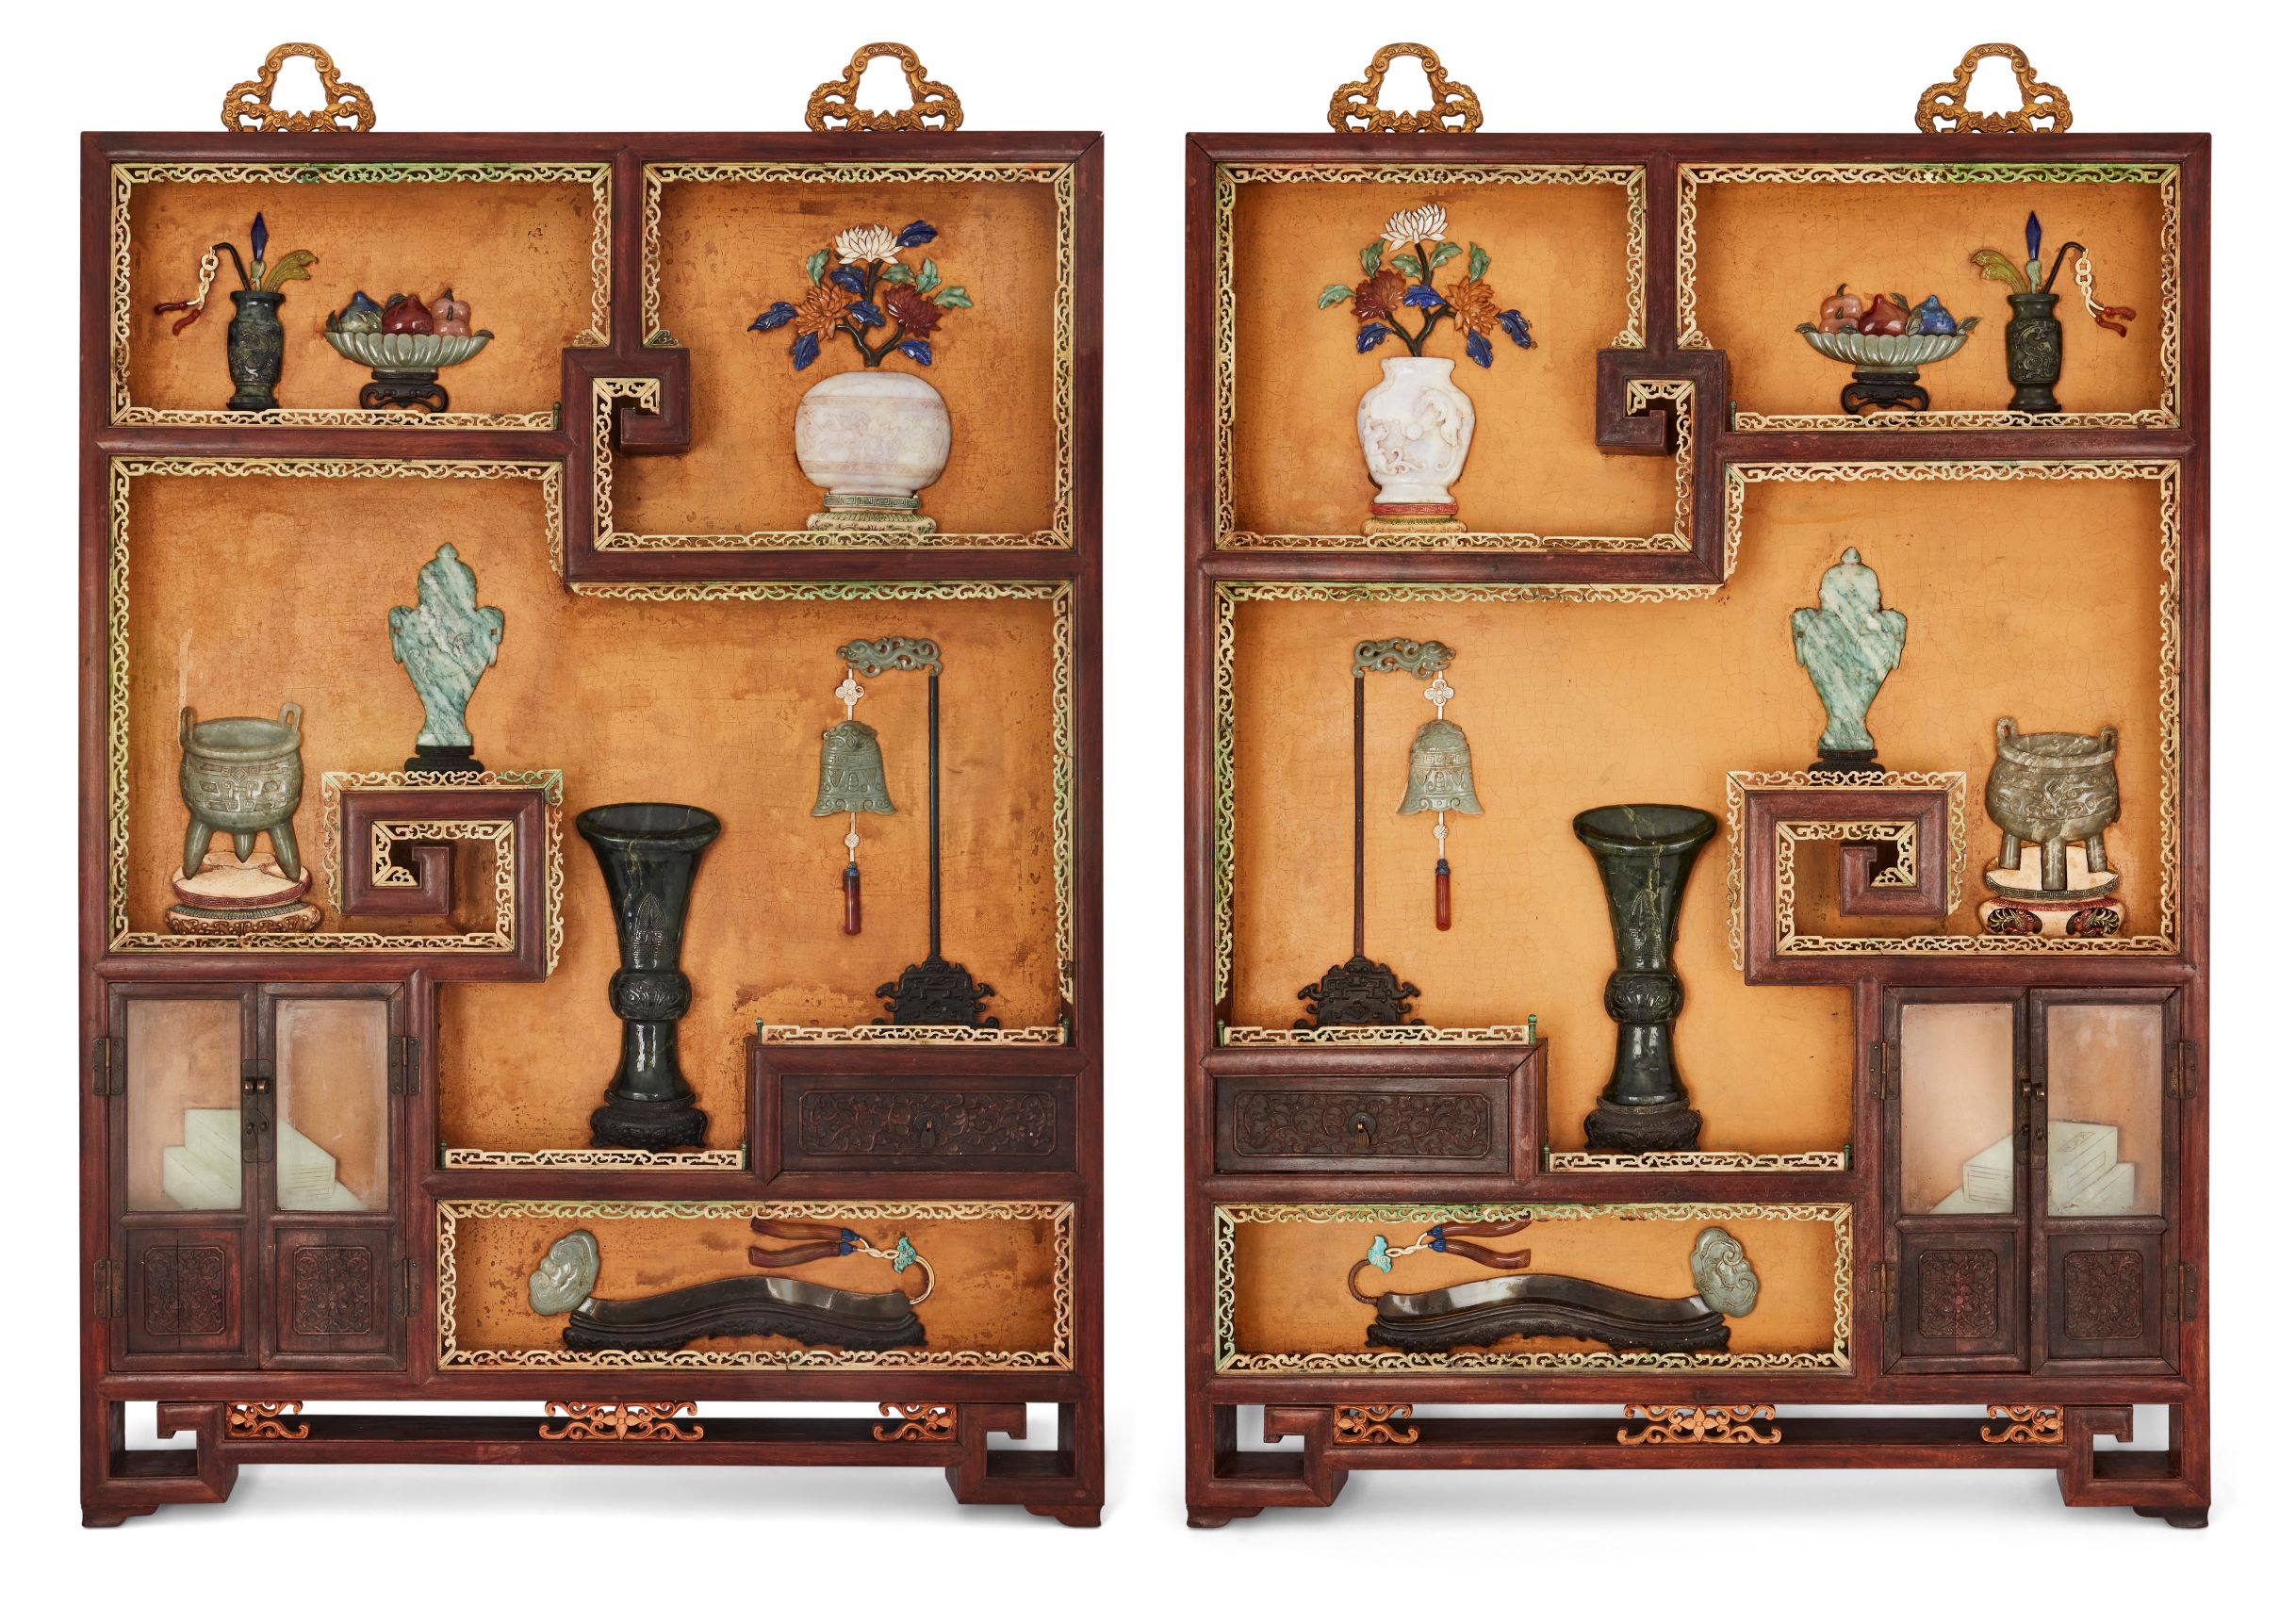 A pair of Chinese hardstone inlaid cabinet plaques, Qing dynasty